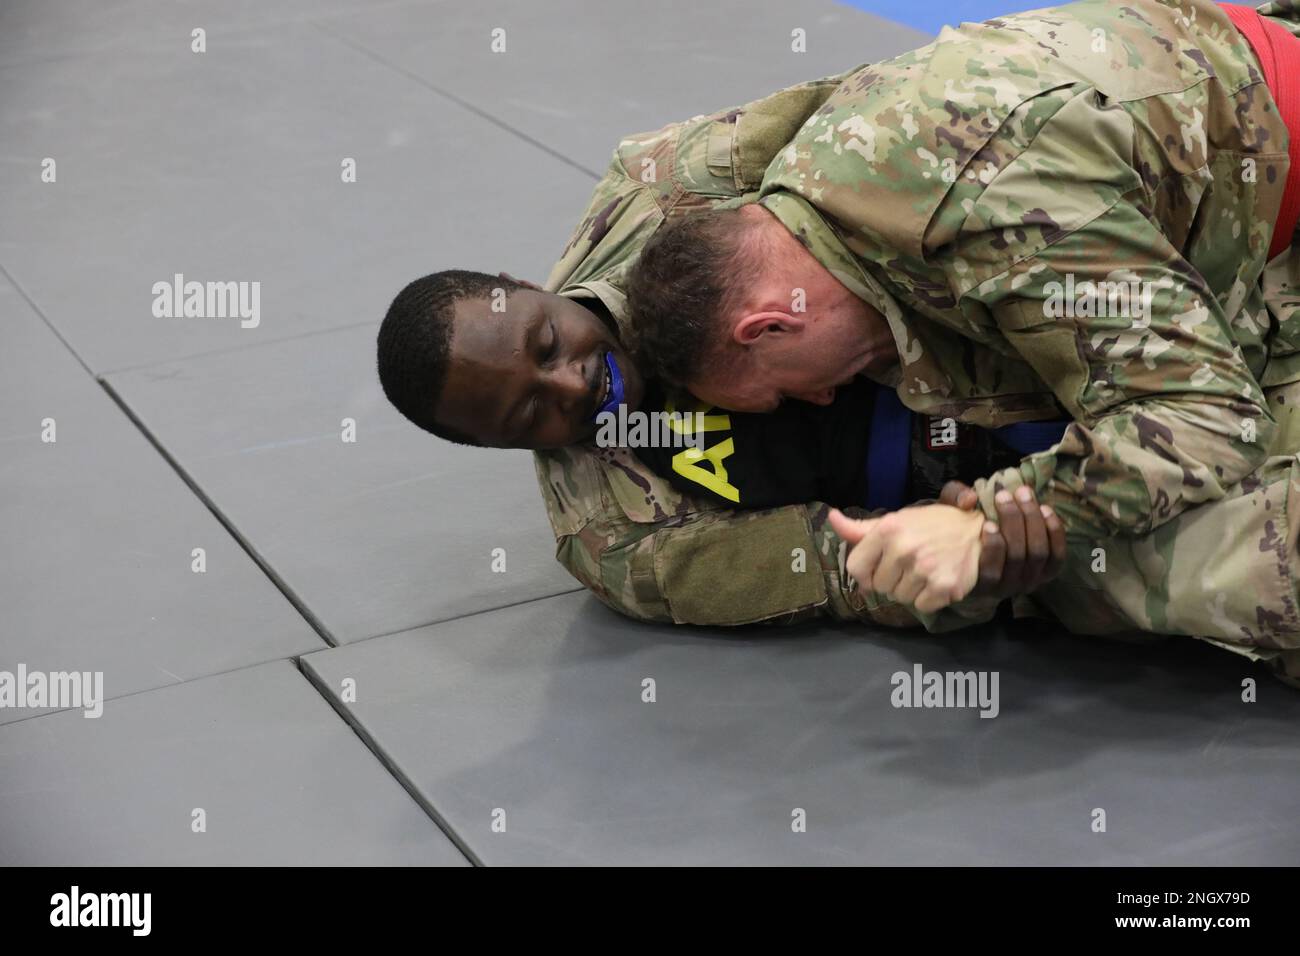 Soldiers from the 3rd Infantry Division compete in a combatives tournament during Marne Week, Nov. 30, 2022, Fort Stewart, Georgia. Marne Week is an annual event in which 'Dogface Soldiers' from across 3ID compete in multiple events in celebration of their history and lineage. Stock Photo